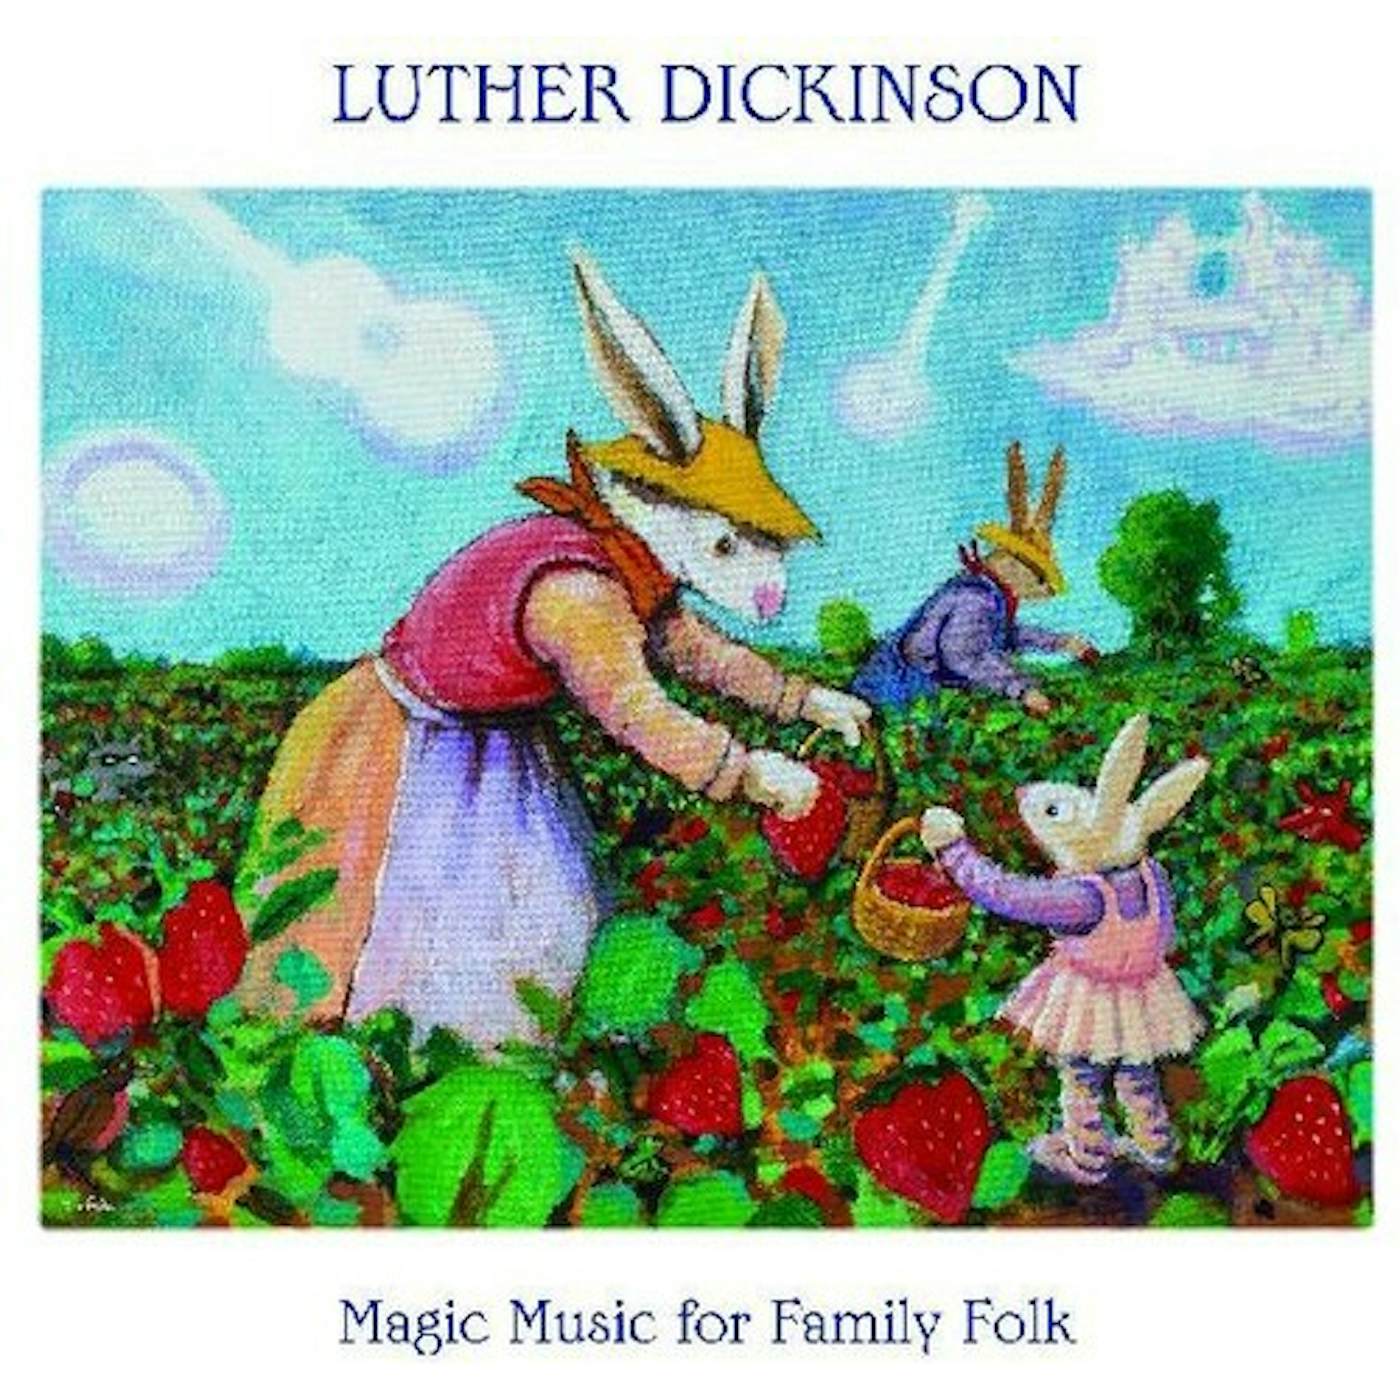 Luther Dickinson MAGIC MUSIC FOR FAMILY FOLK CD